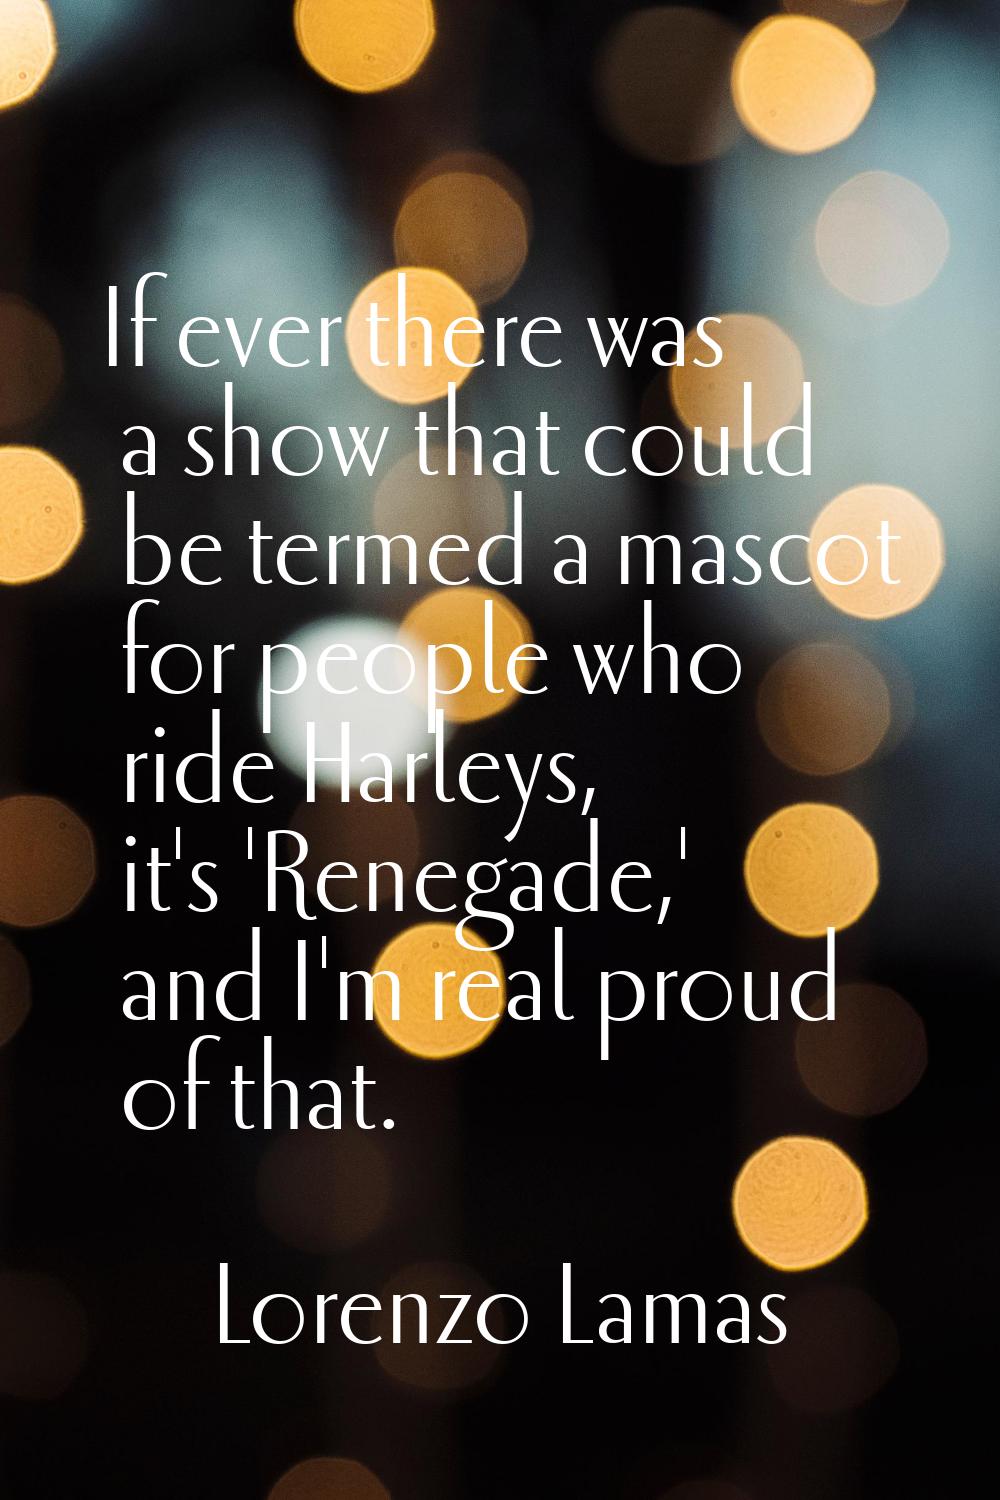 If ever there was a show that could be termed a mascot for people who ride Harleys, it's 'Renegade,